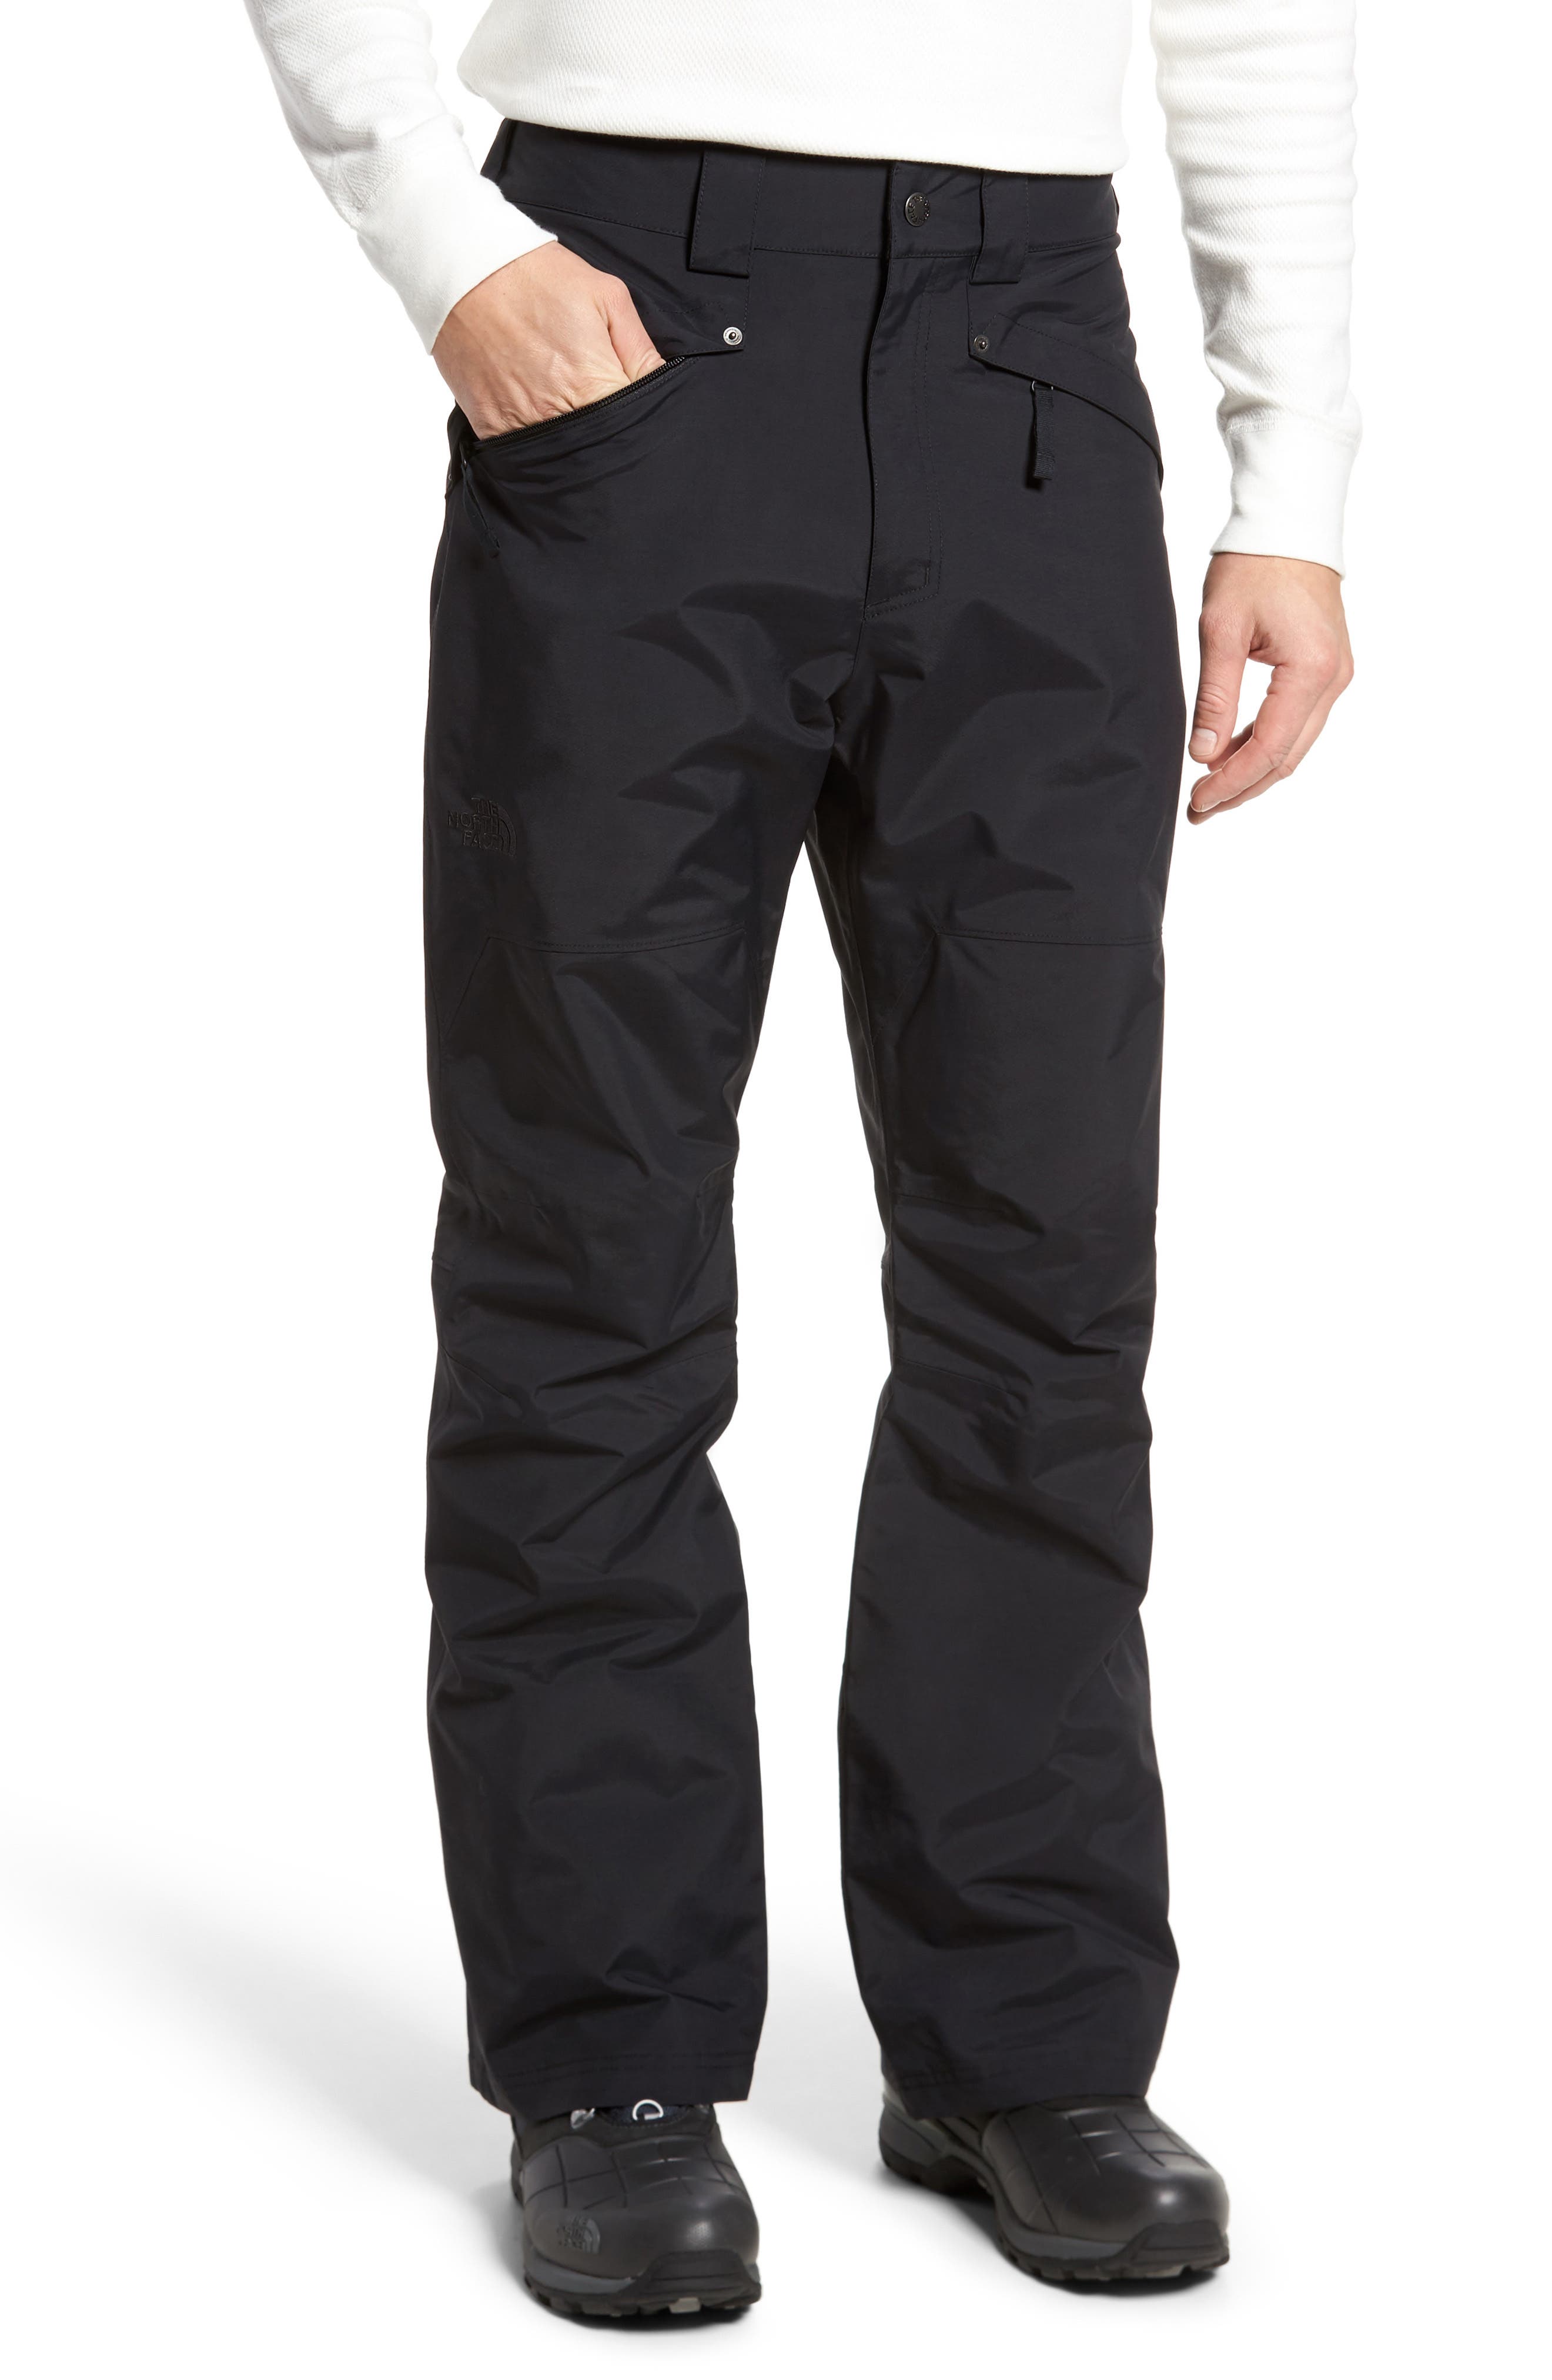 north face white snow pants